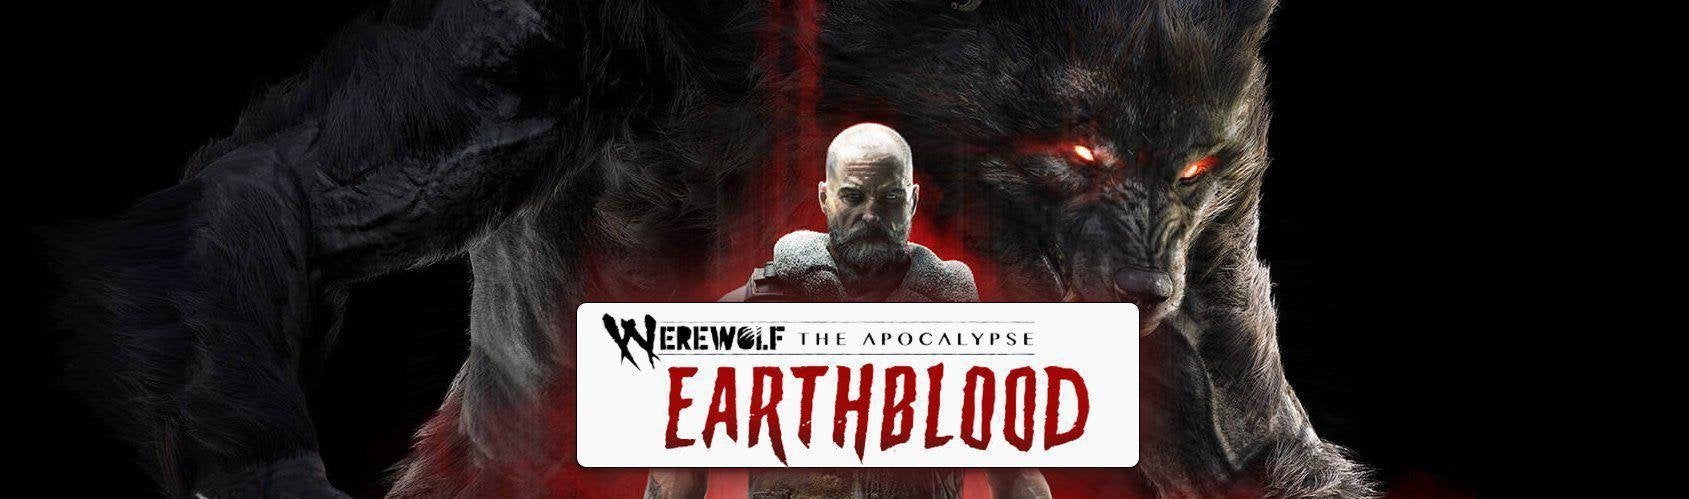 Werewolf: The Apocalypse Earthblood - A Waste of Potential-Custom Controllers UK